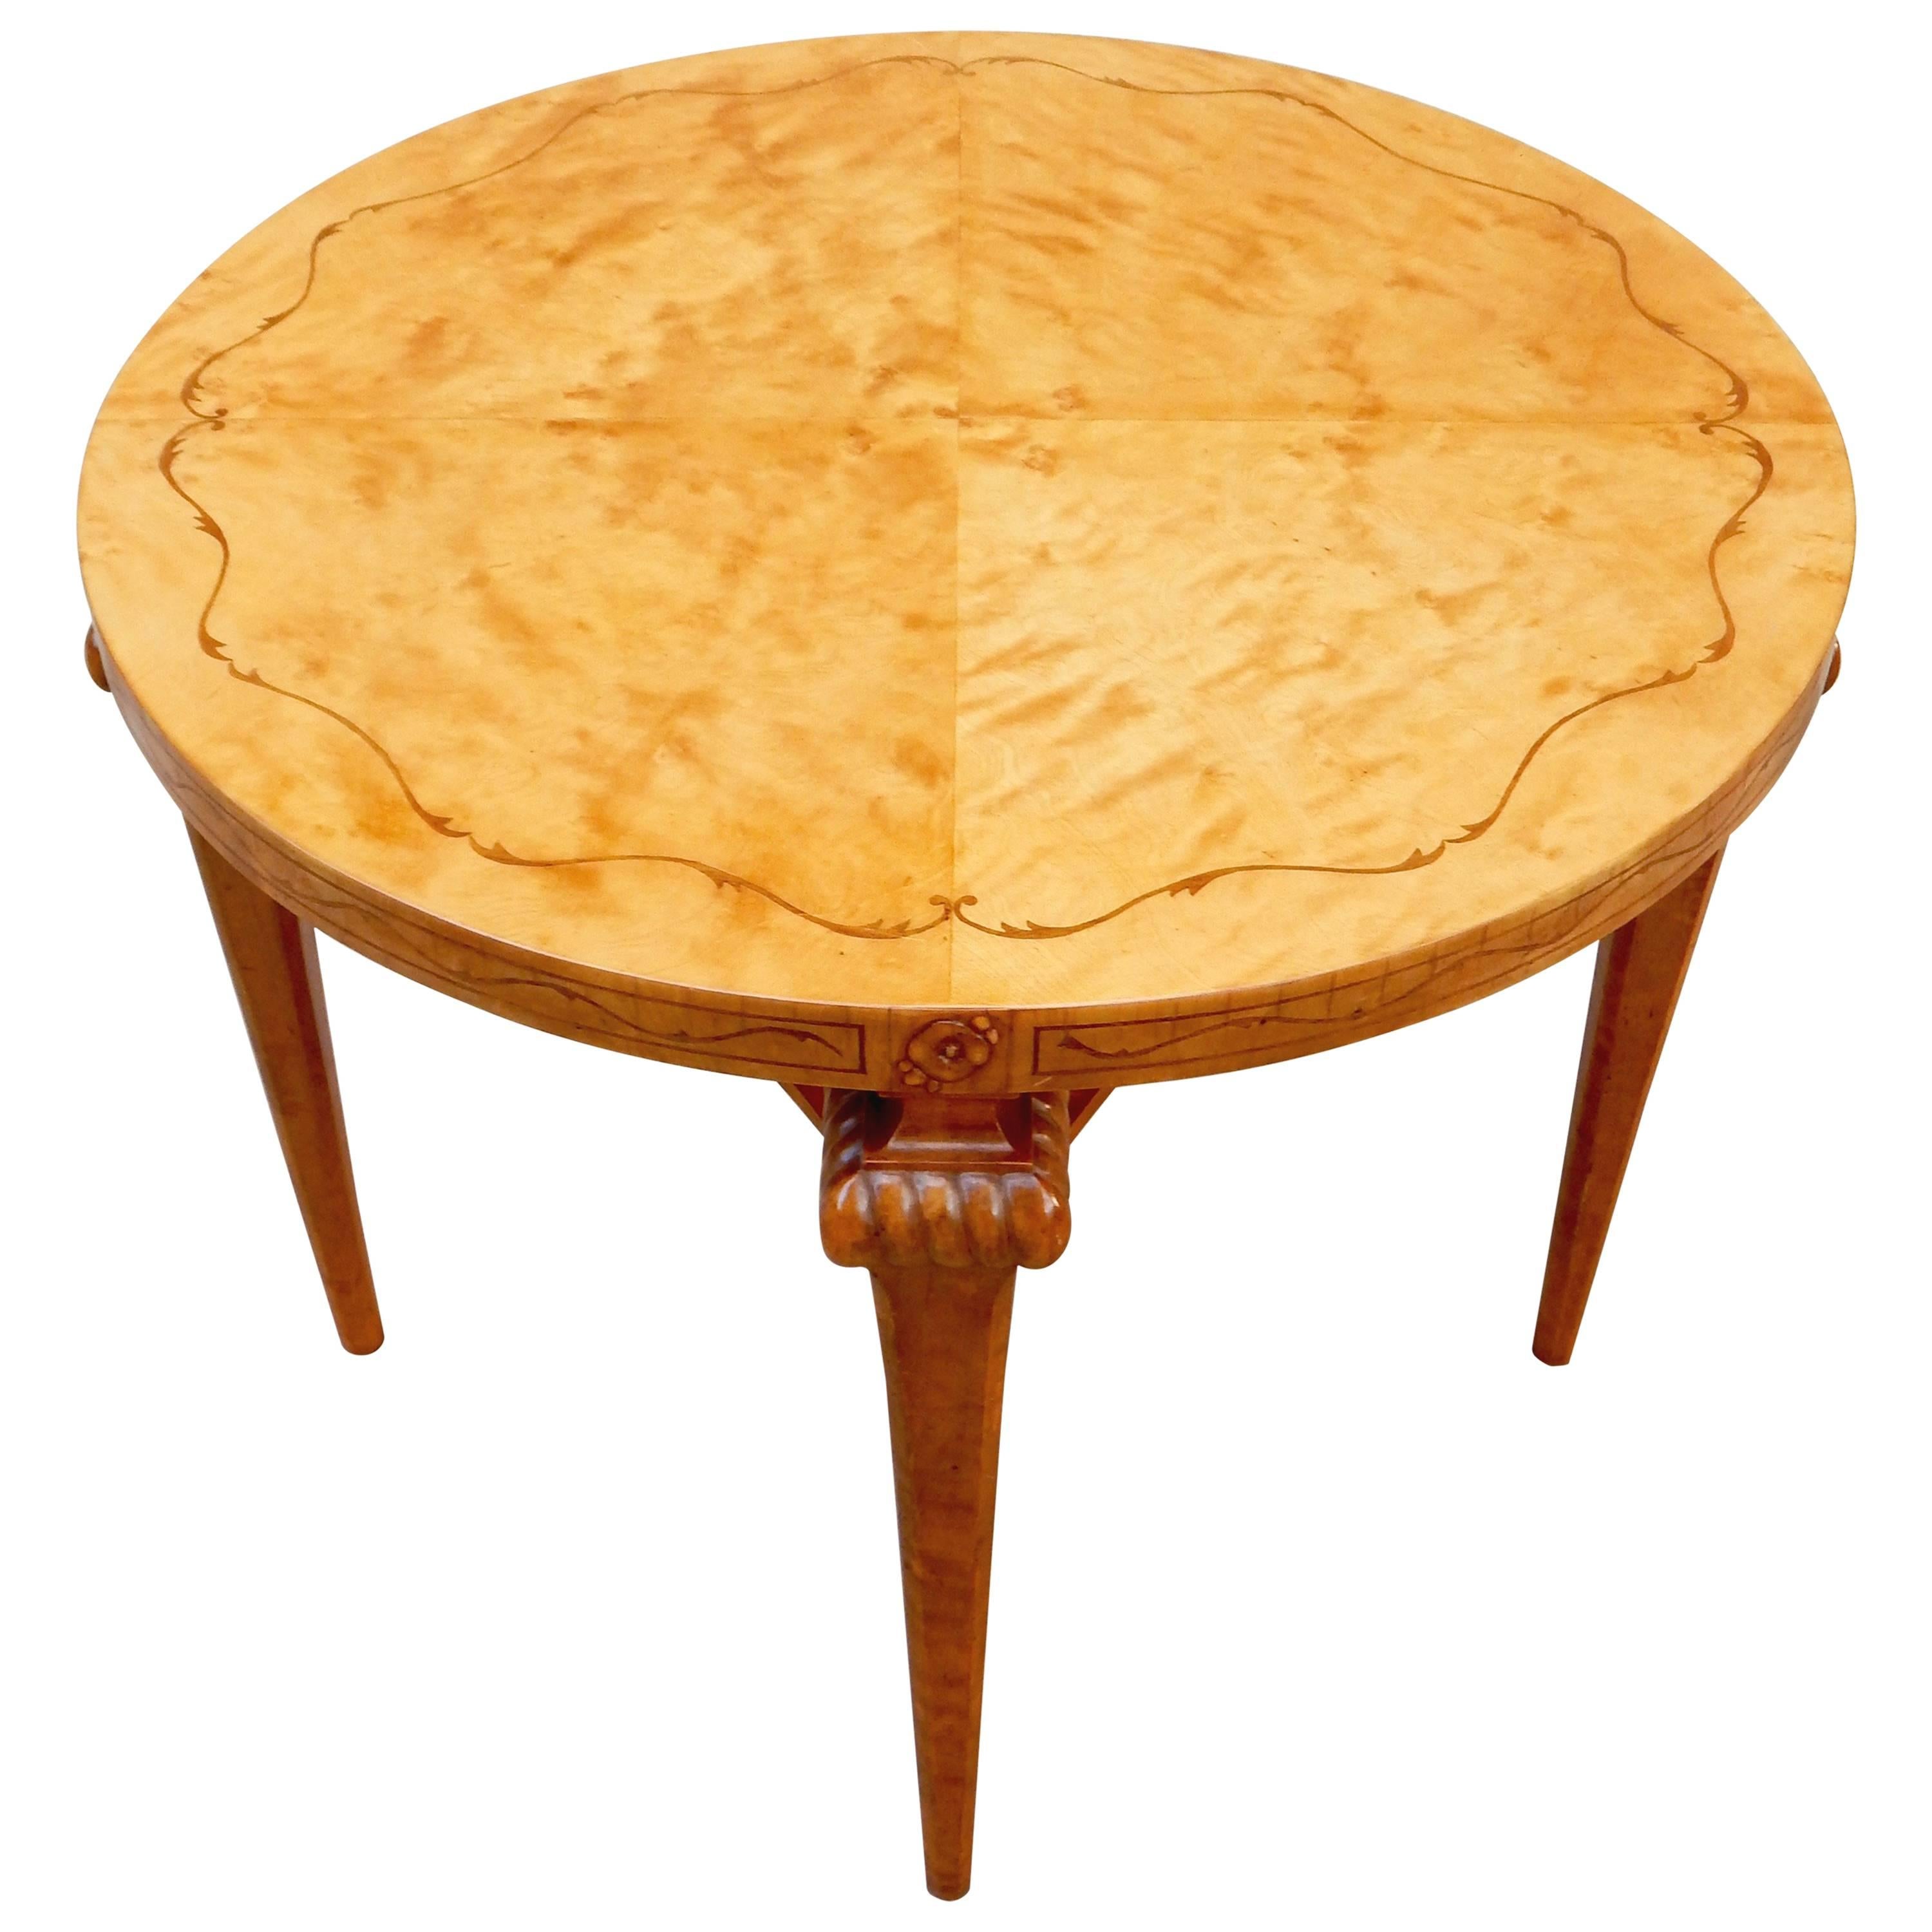 Swedish Art Deco Table in Highly Figured Golden Flame Birch Wood, circa 1920 For Sale